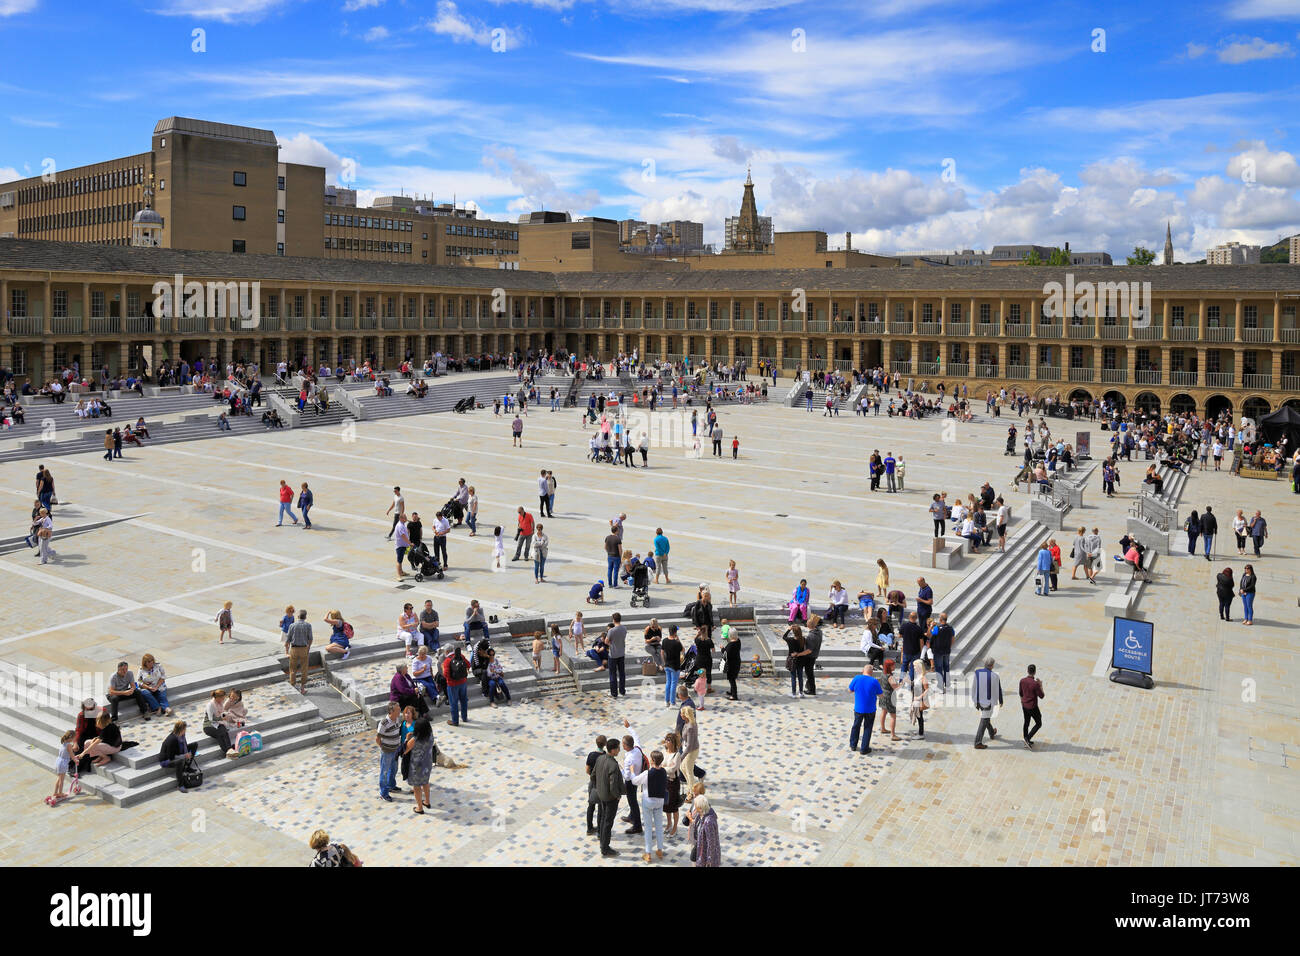 The recently opened Piece Hall after a £19 million conservation and transformation programme, Halifax, West Yorkshire, England, UK. Stock Photo